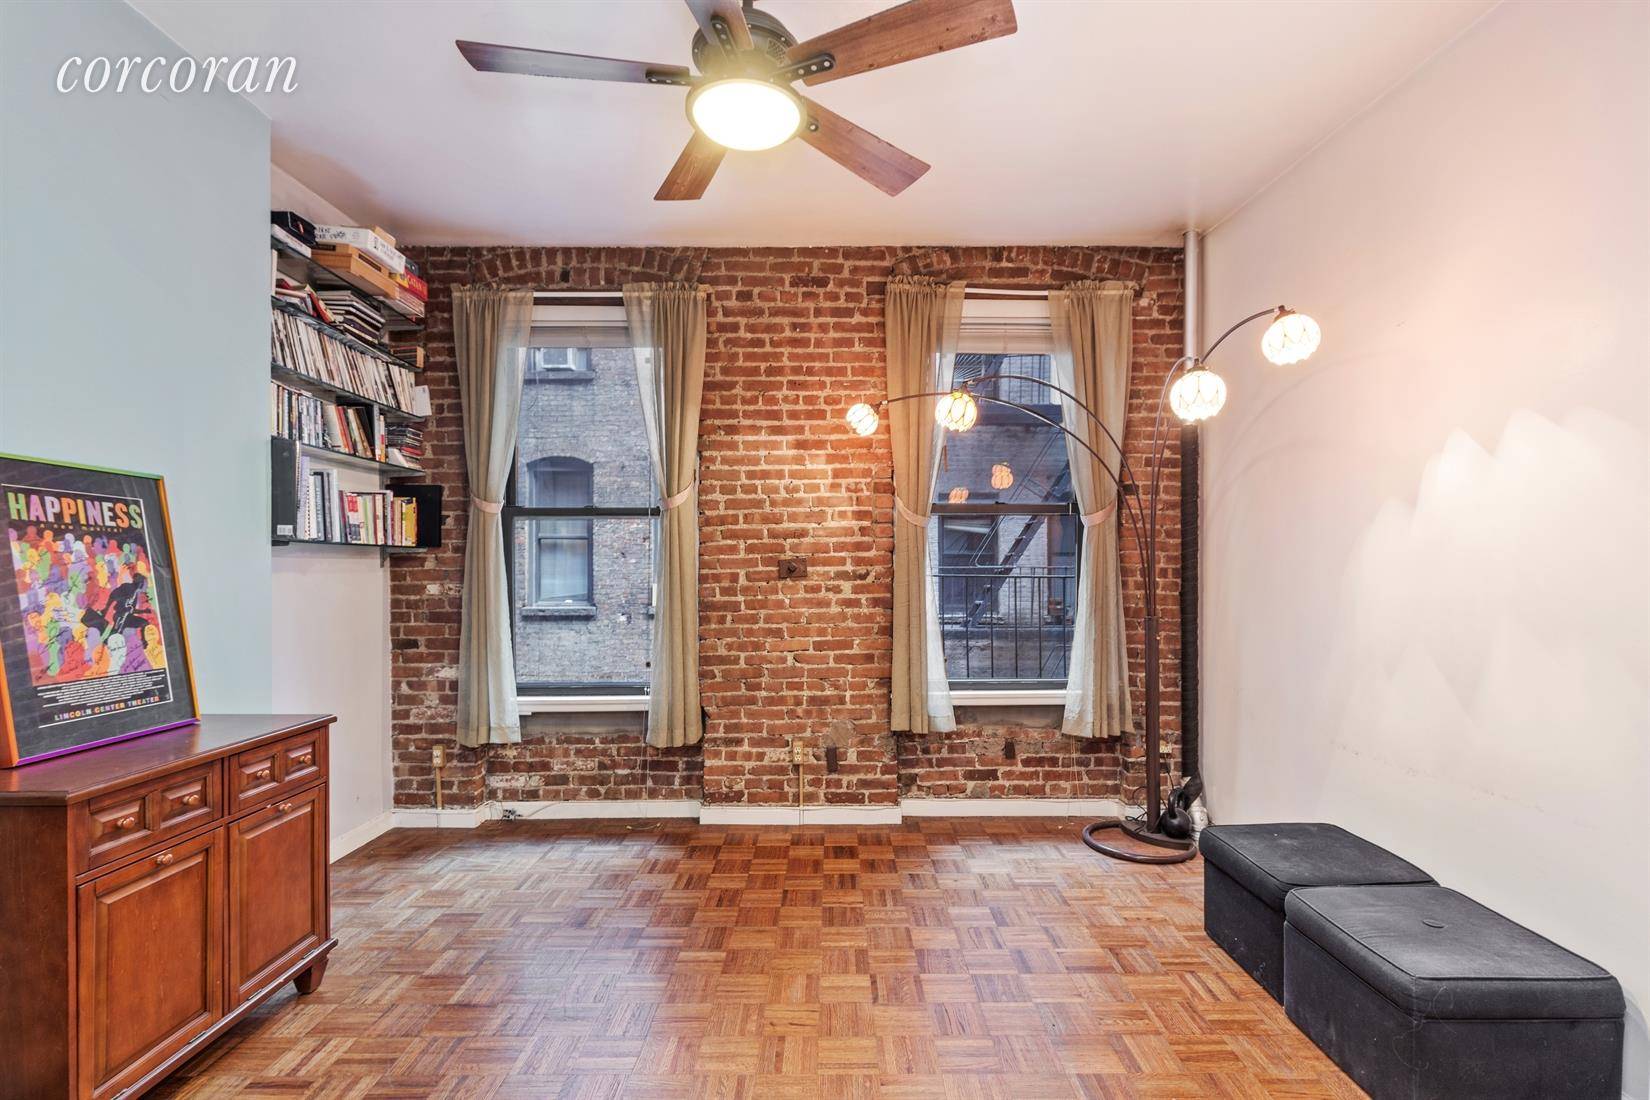 349 West 44th 2RW is BACK ON THE MARKET !